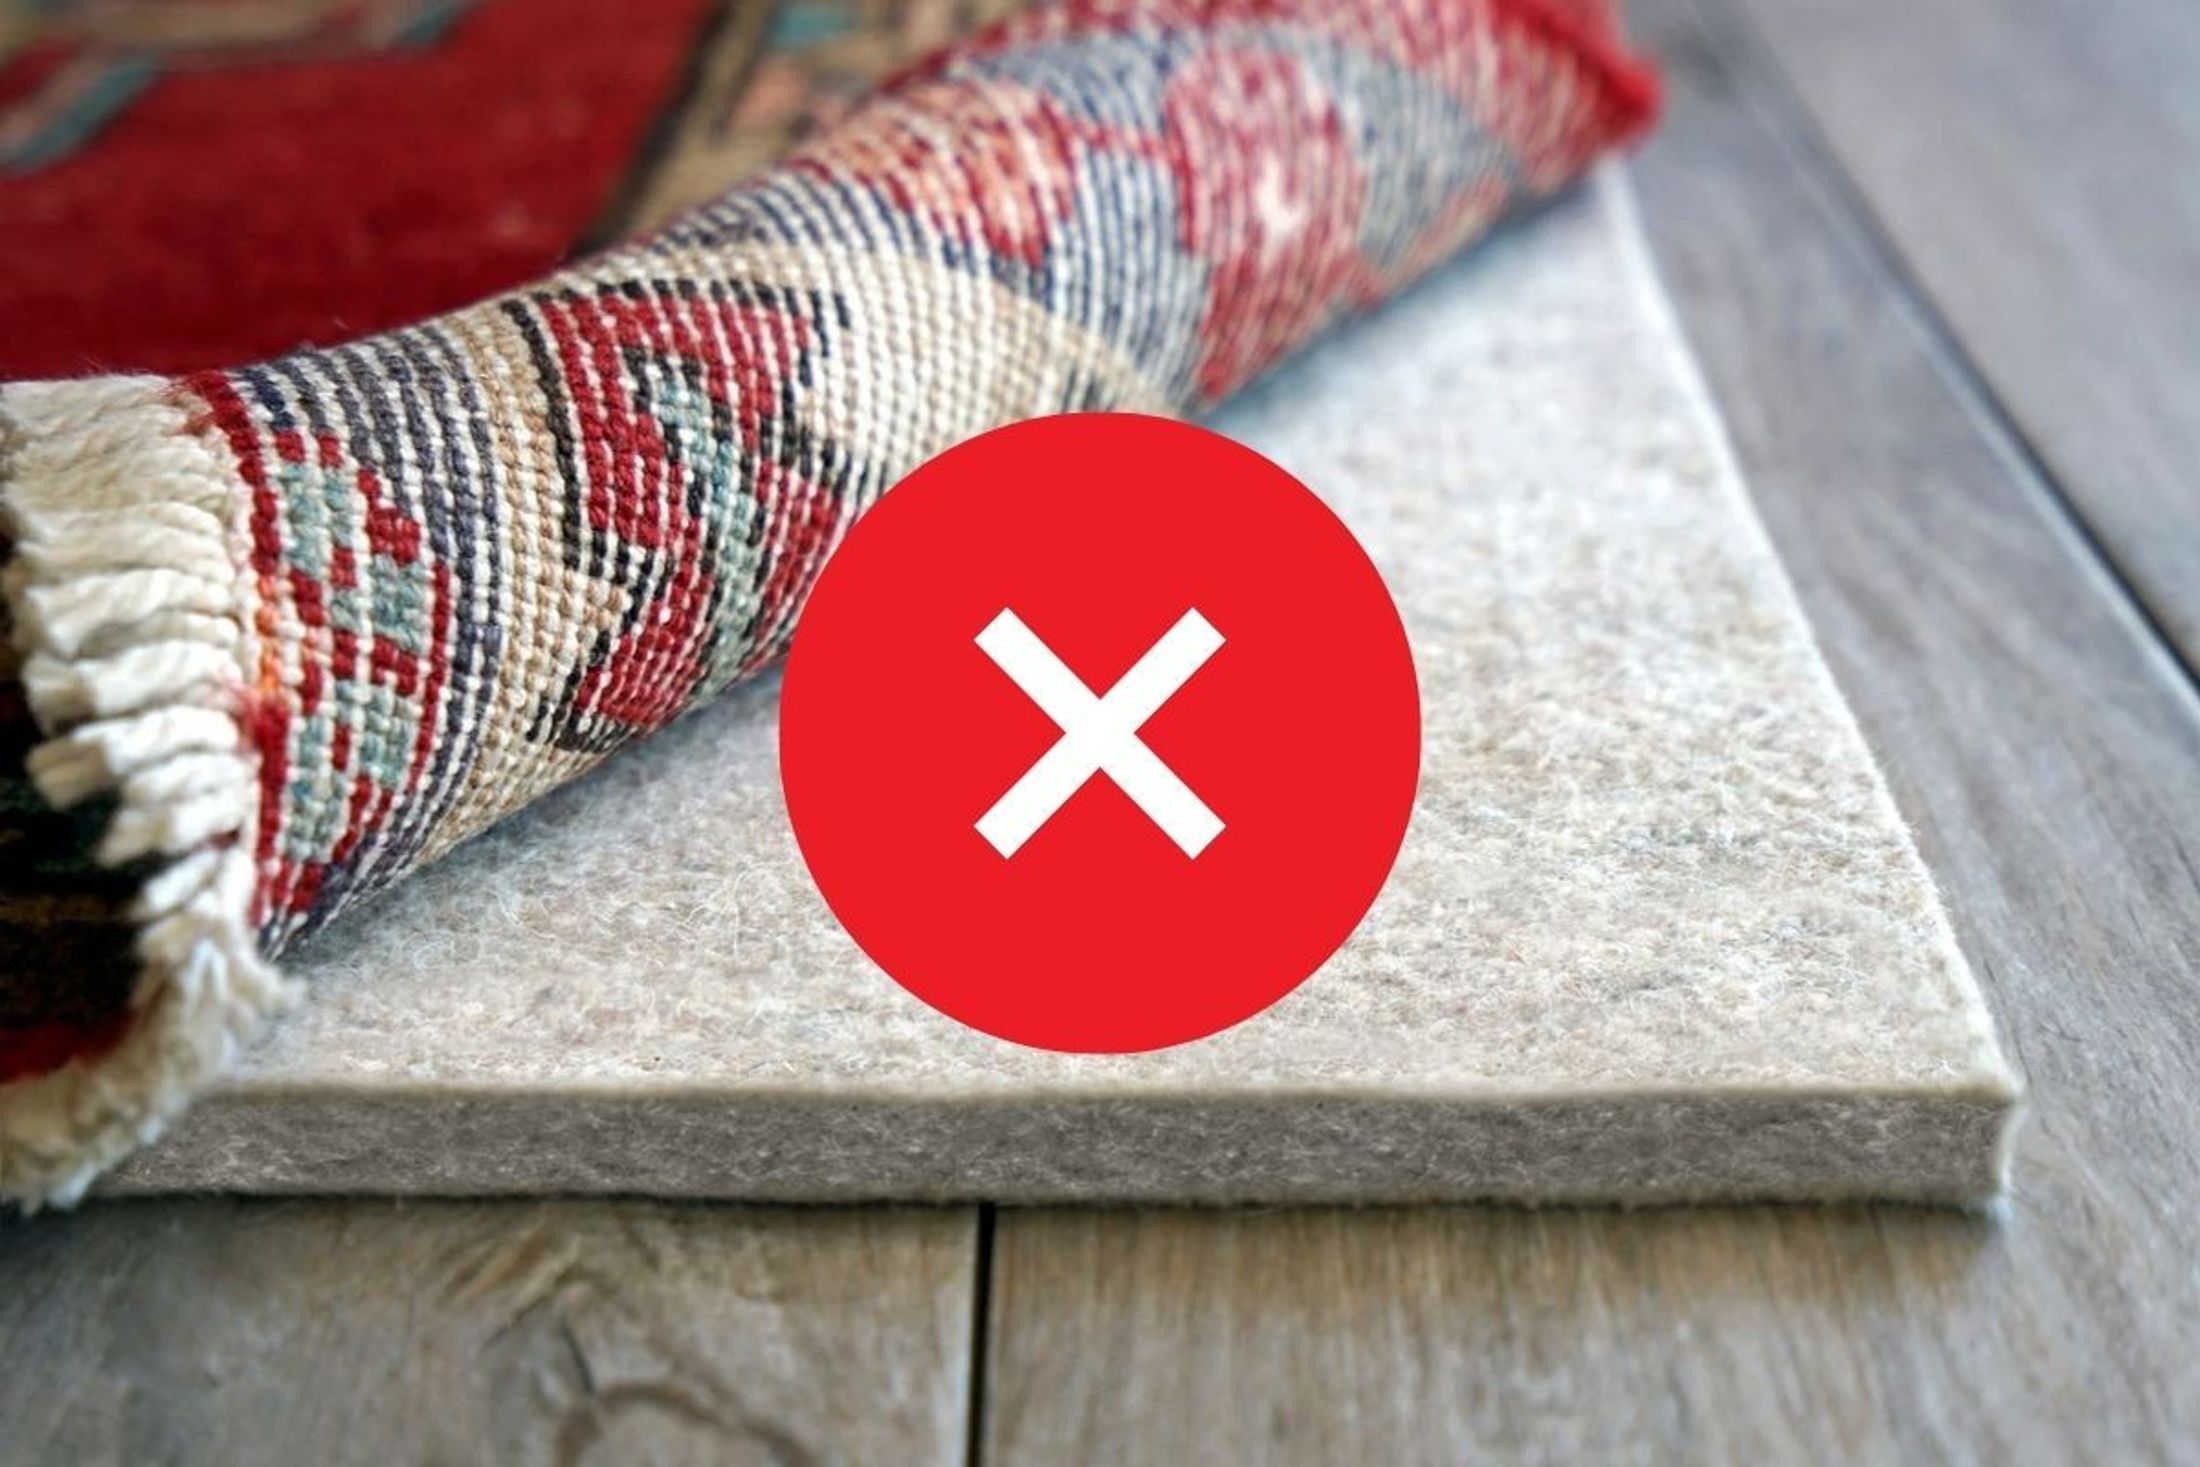 Carpet Padding & Rug Padding: What is Right for Your Home?